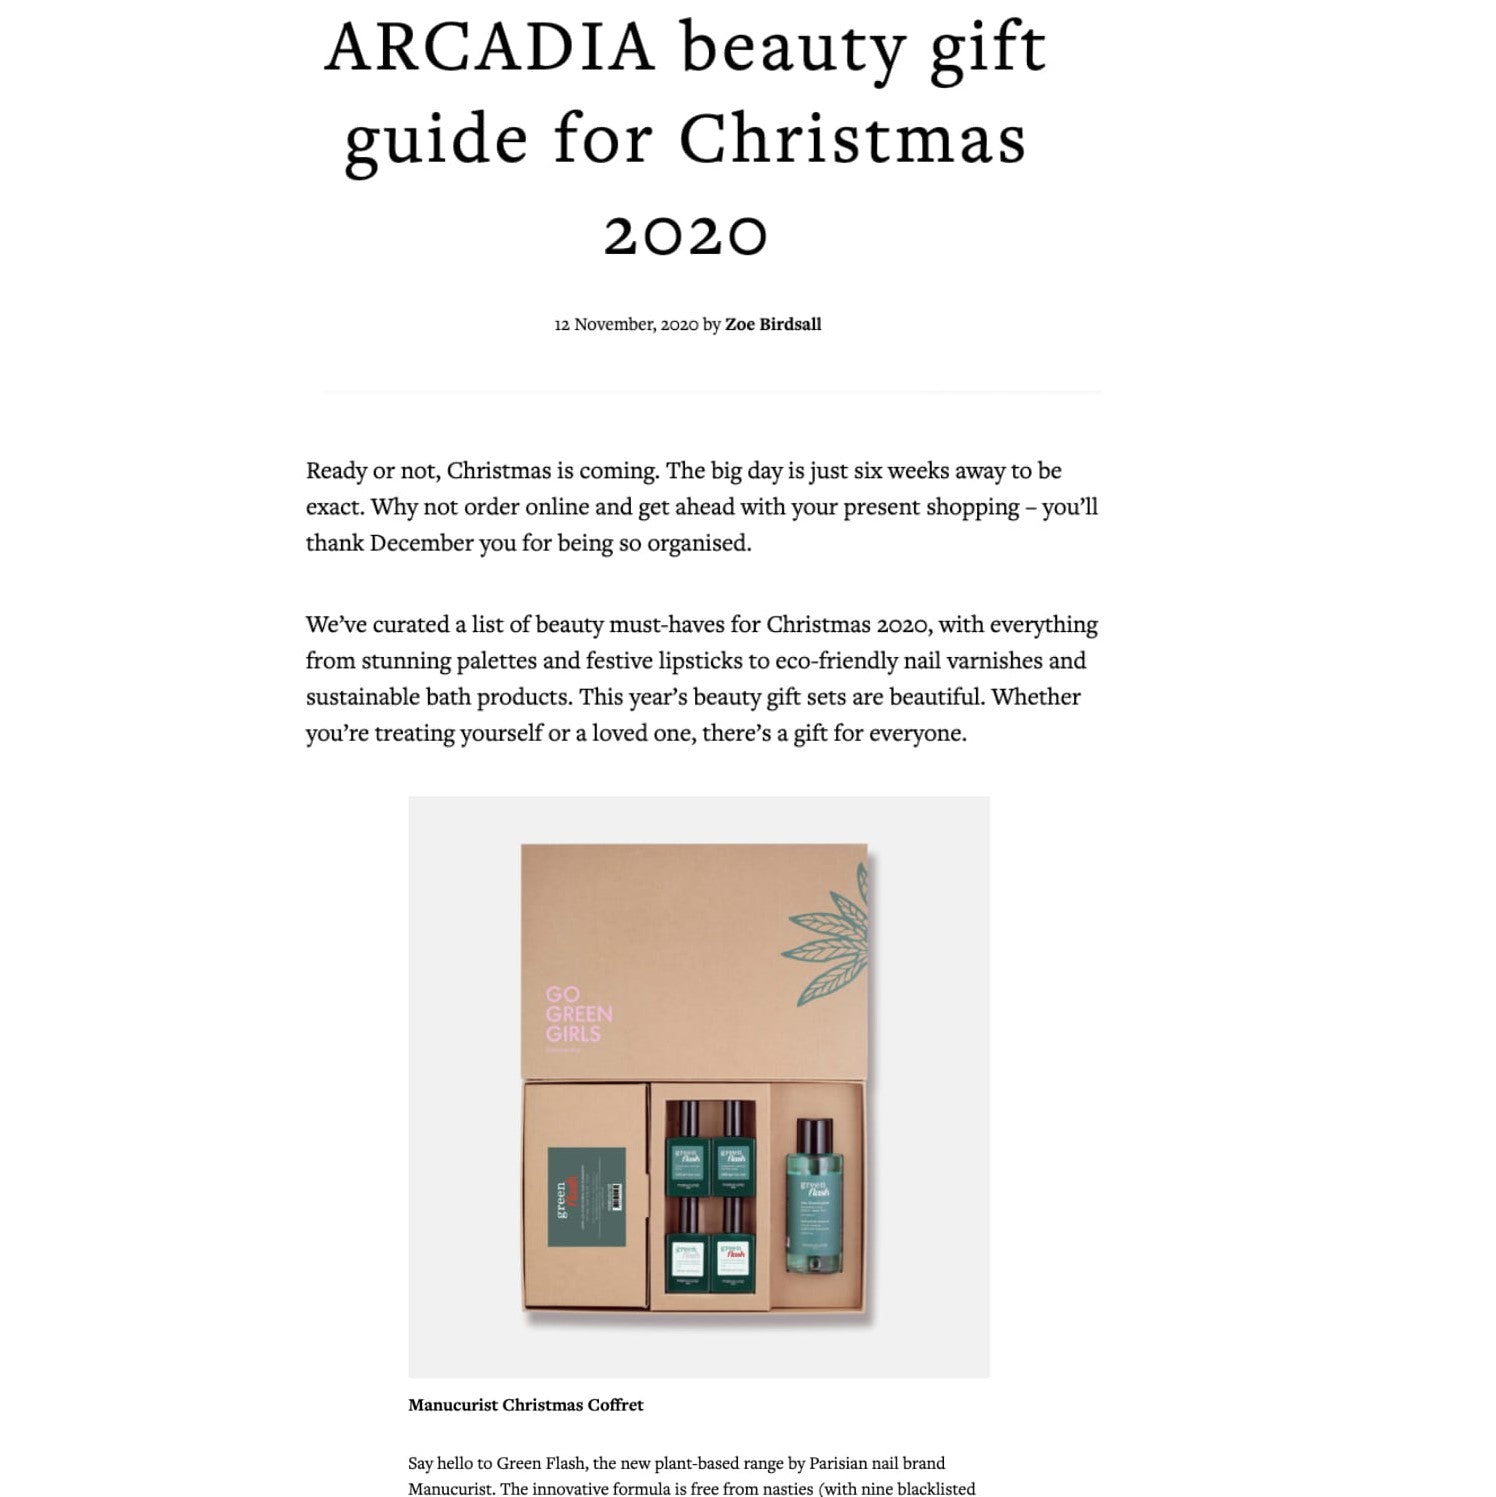 Beauty gift guide for Christmas 2020